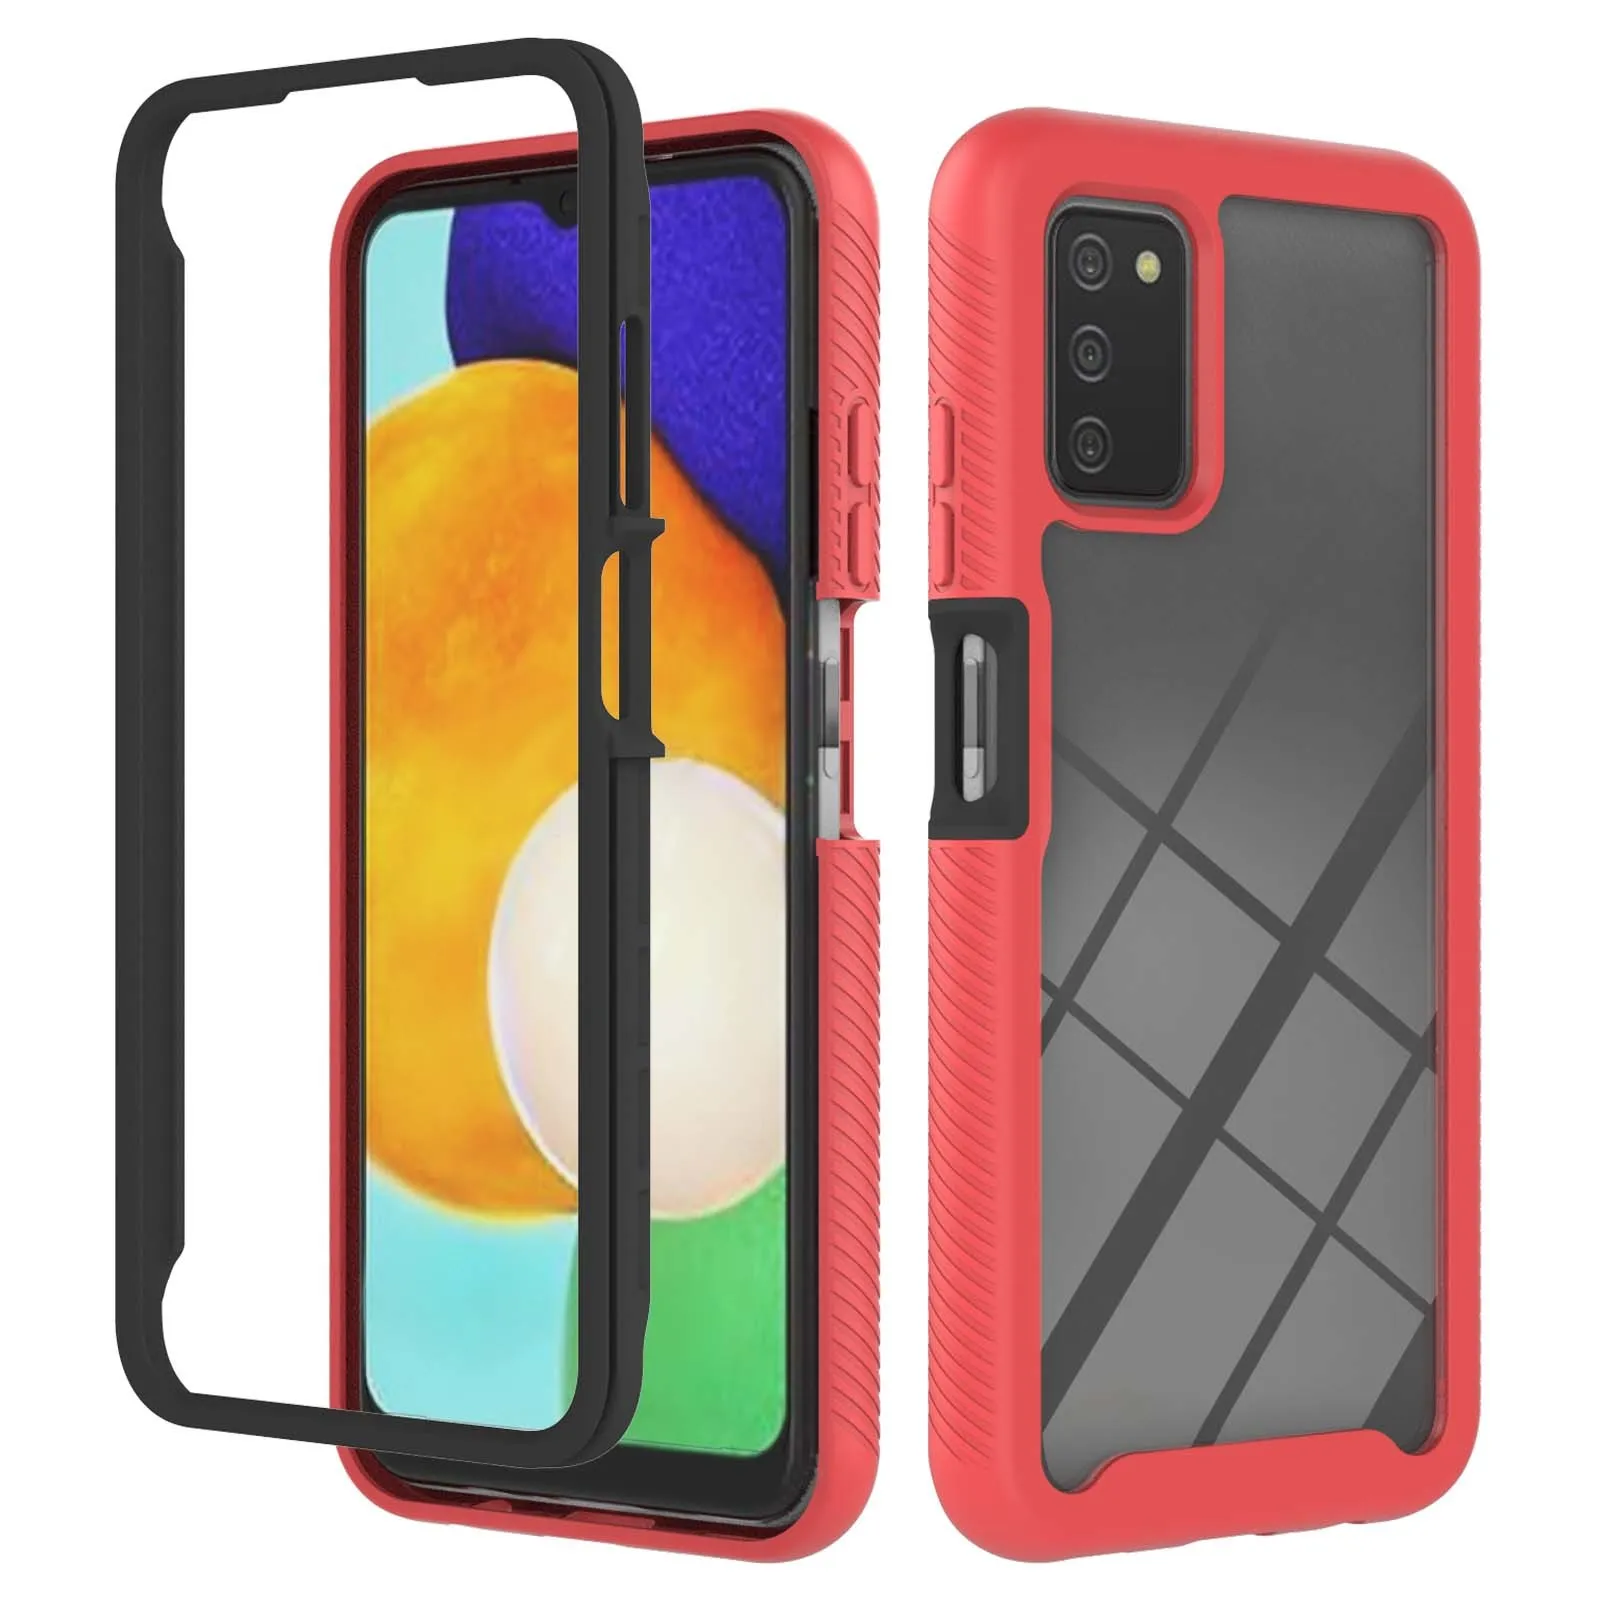 2 in 1 Hybrid Rugged Protective Cases For Samsung Galaxy A03S A02S A82 A22 A12 A32 A42 A52 A72 S21 S20 FE A51 A71 A21s Back Cover